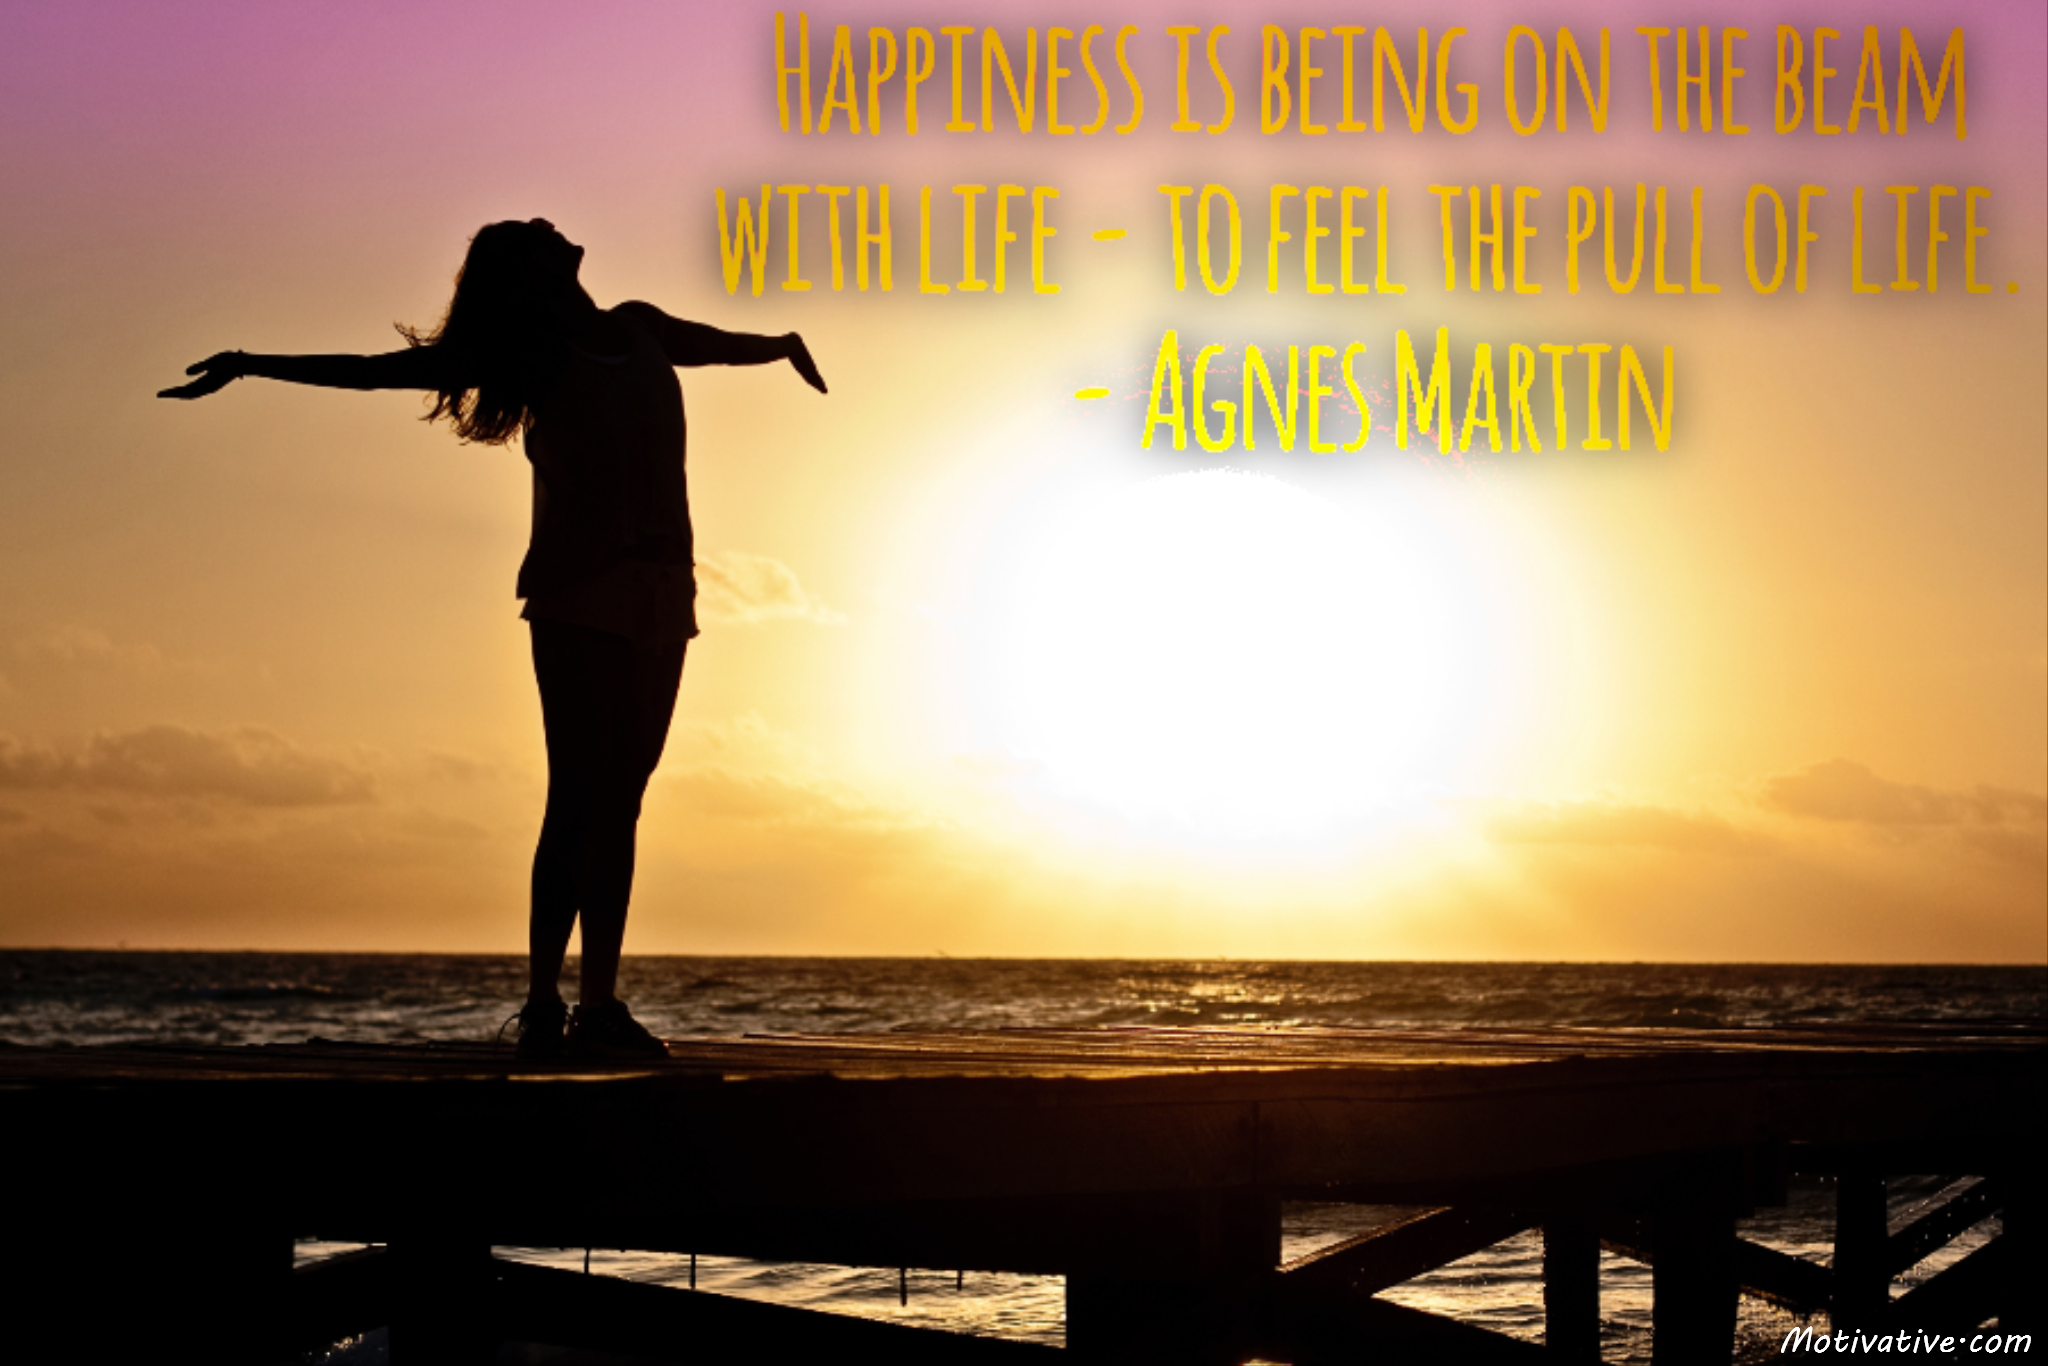 Happiness is being on the beam with life – to feel the pull of life. – Agnes Martin